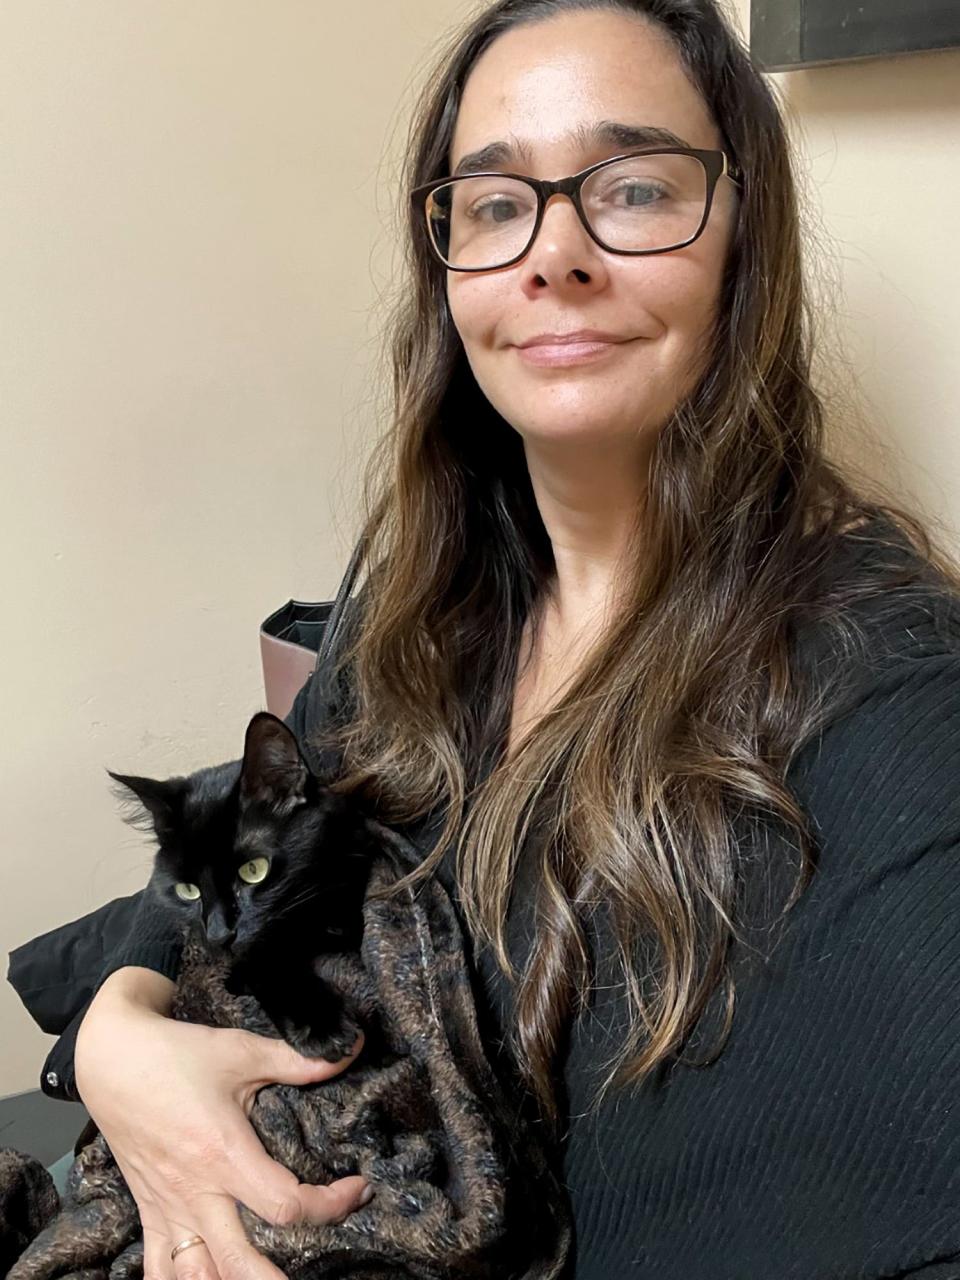 Jenay Chartier holds Freezy, a cat she found with three of her paws frozen in the snow. This was at Freezy's visit to the vet following her rescue.